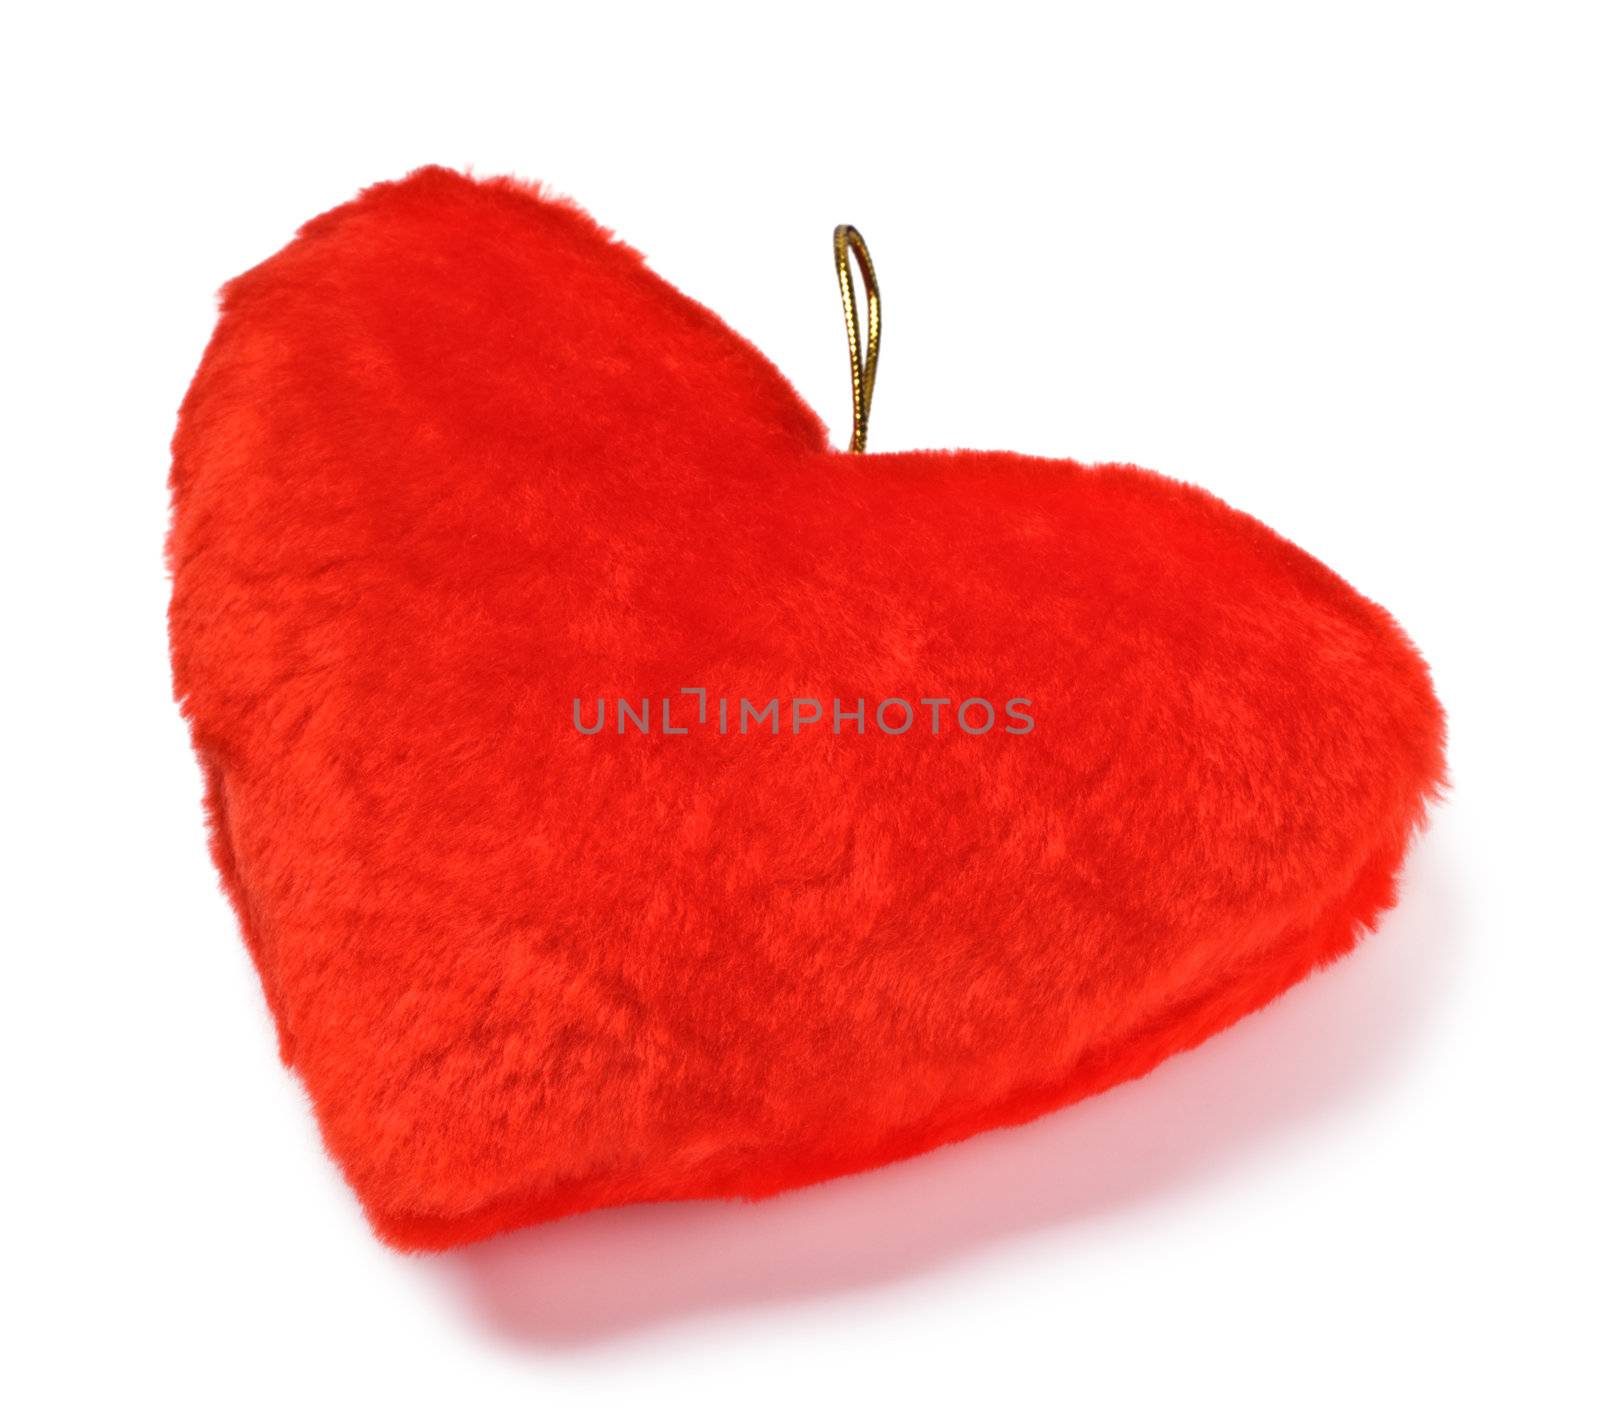 red heart shaped pillow by petr_malyshev